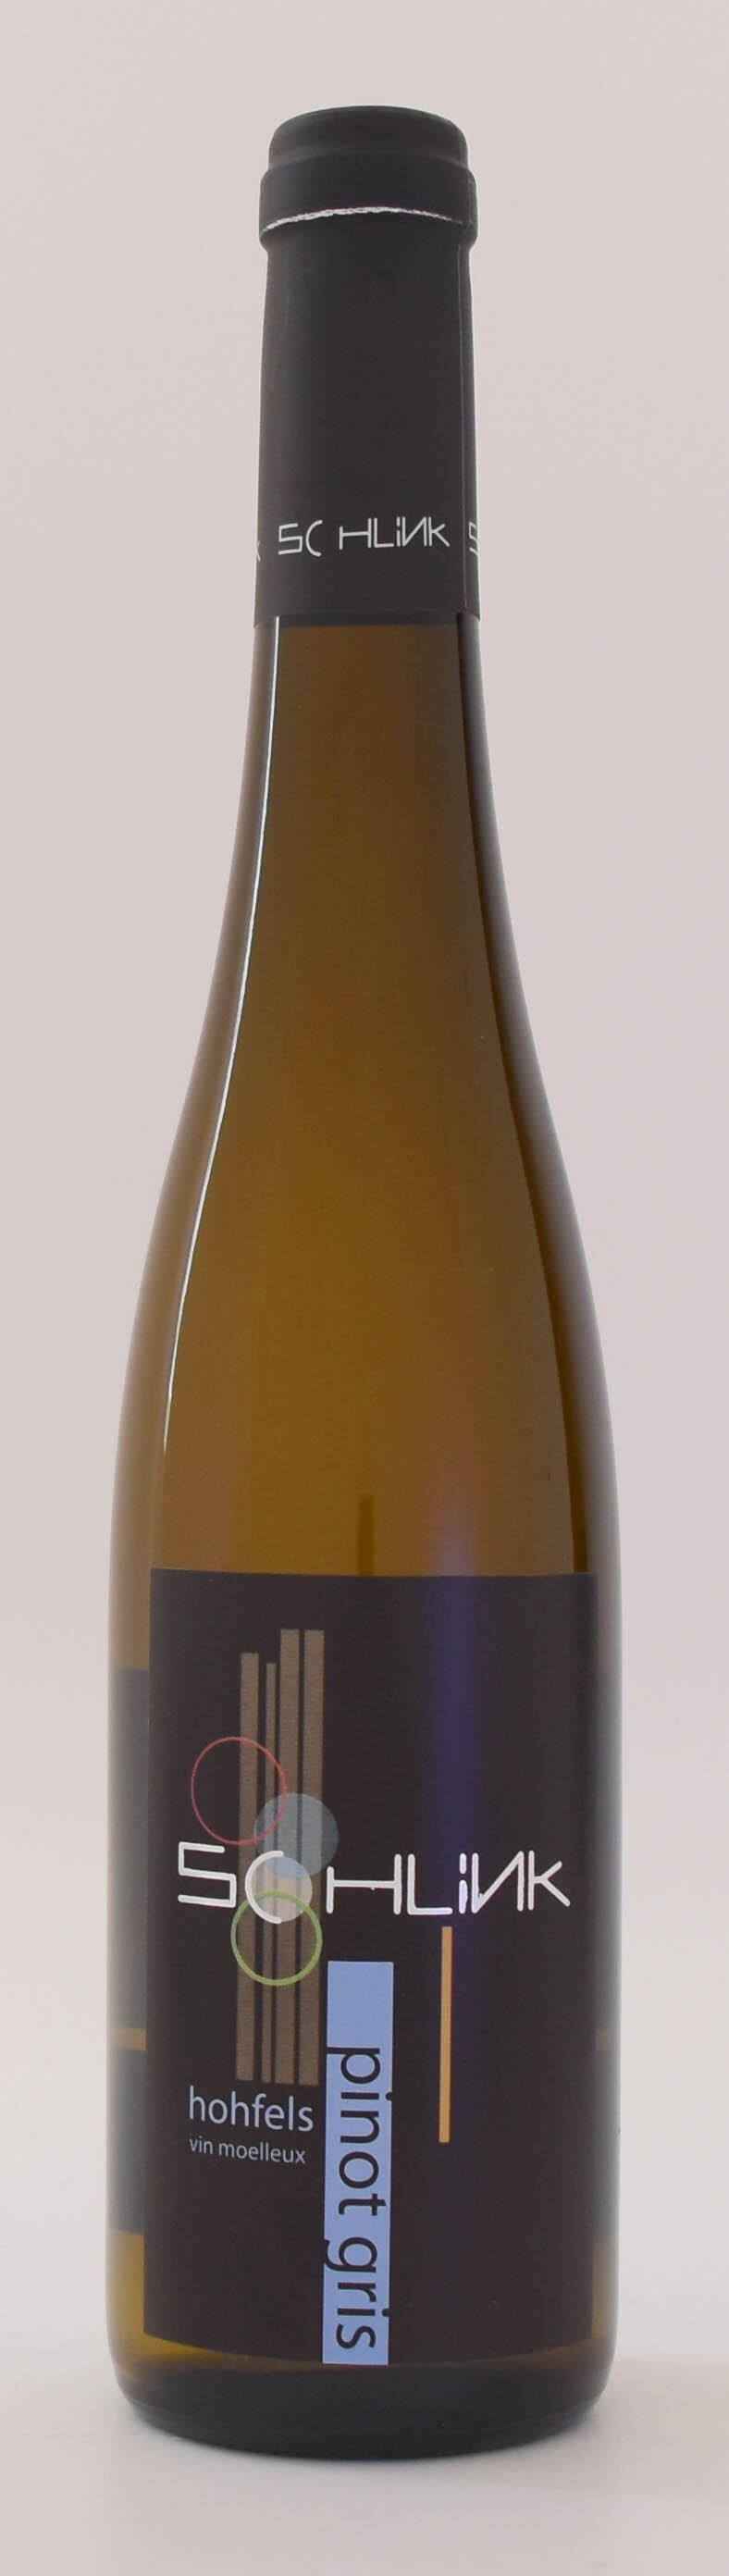 Pinot Gris Moelleux 2015 GPC